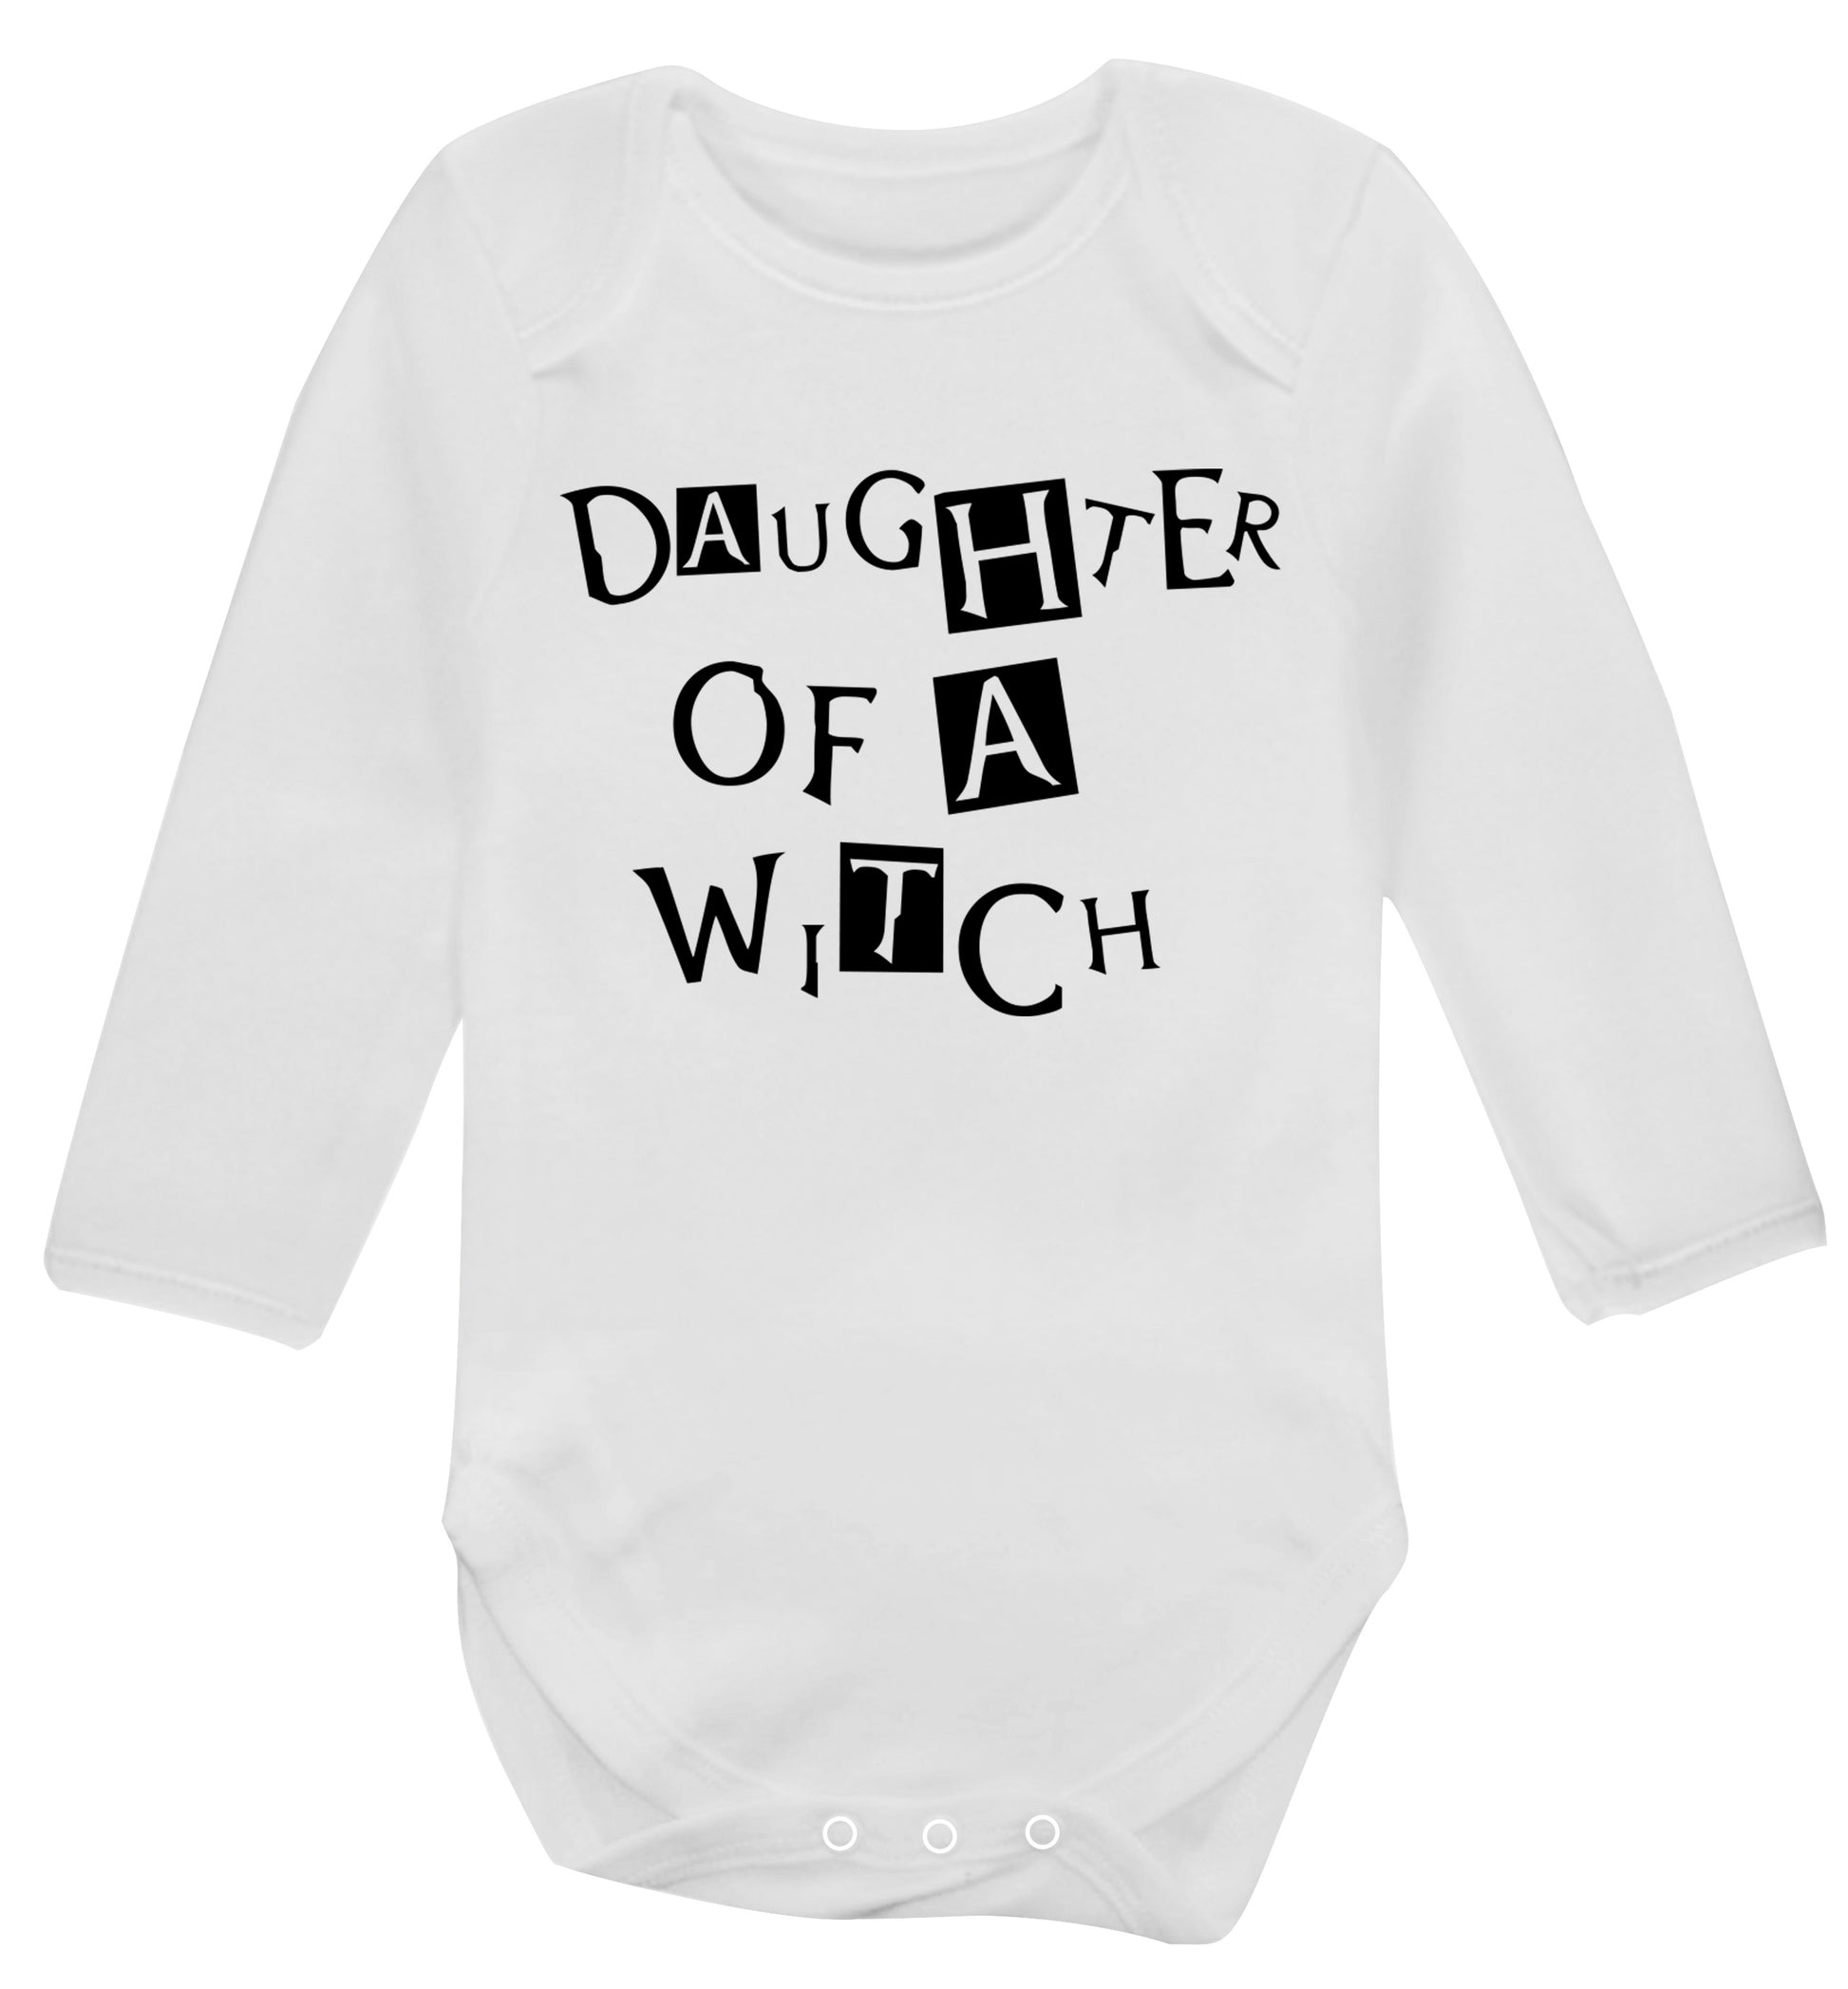 Daughter of a witch Baby Vest long sleeved white 6-12 months